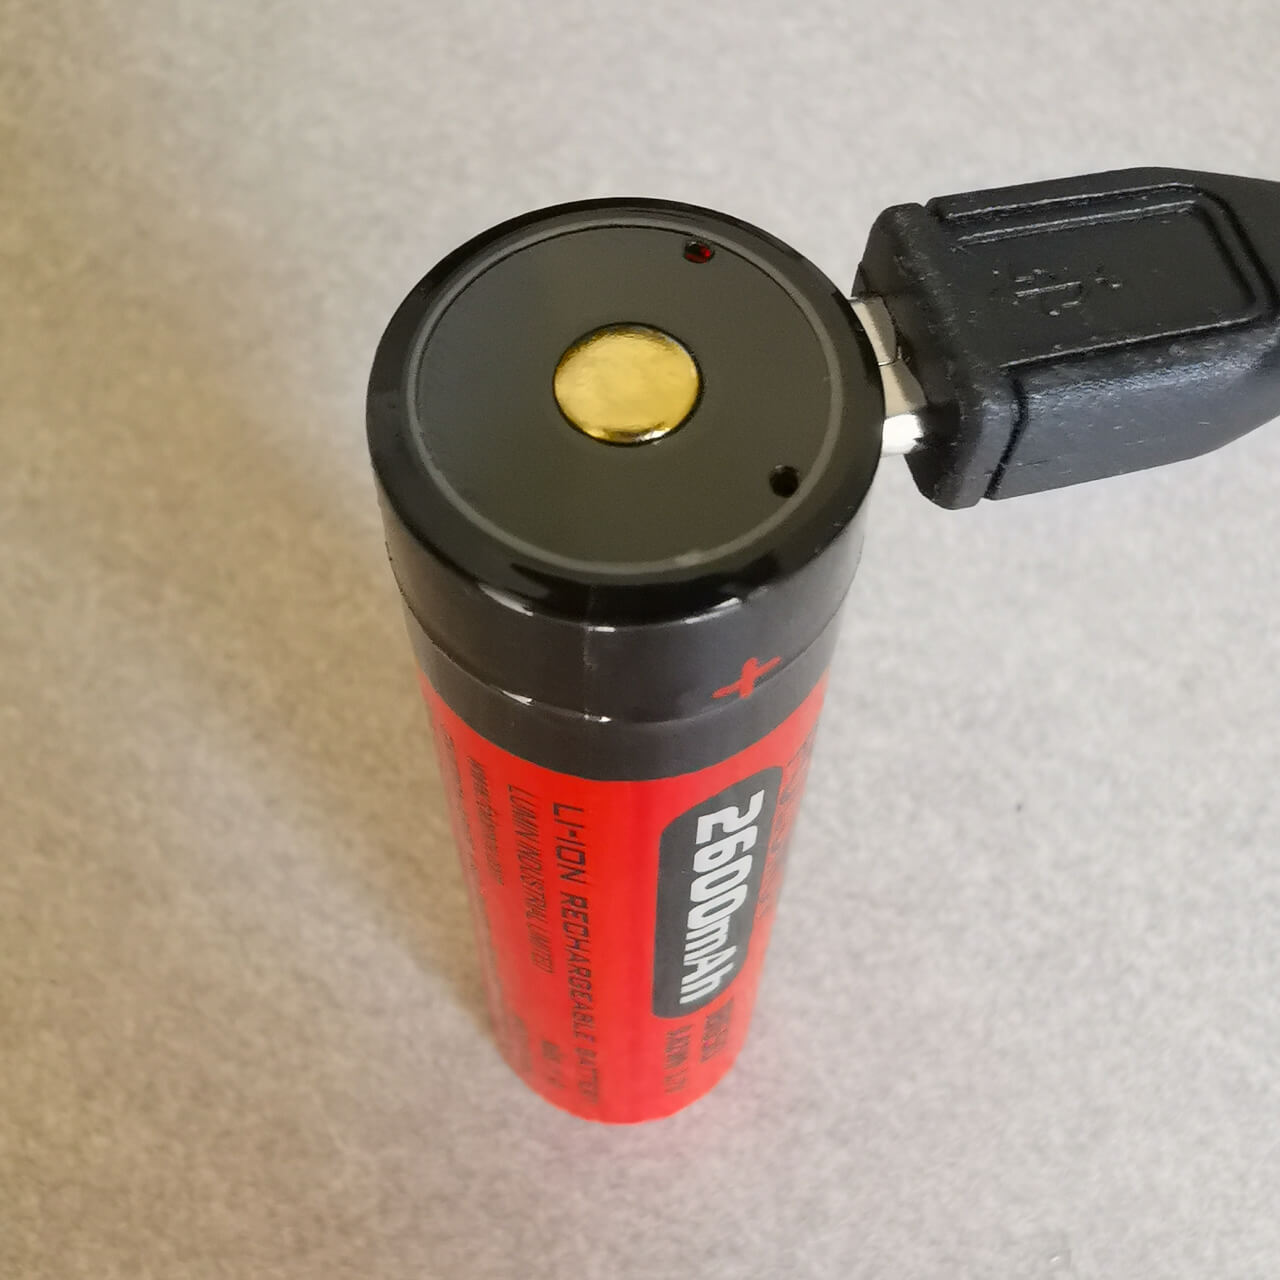 18650 battery with USB charging